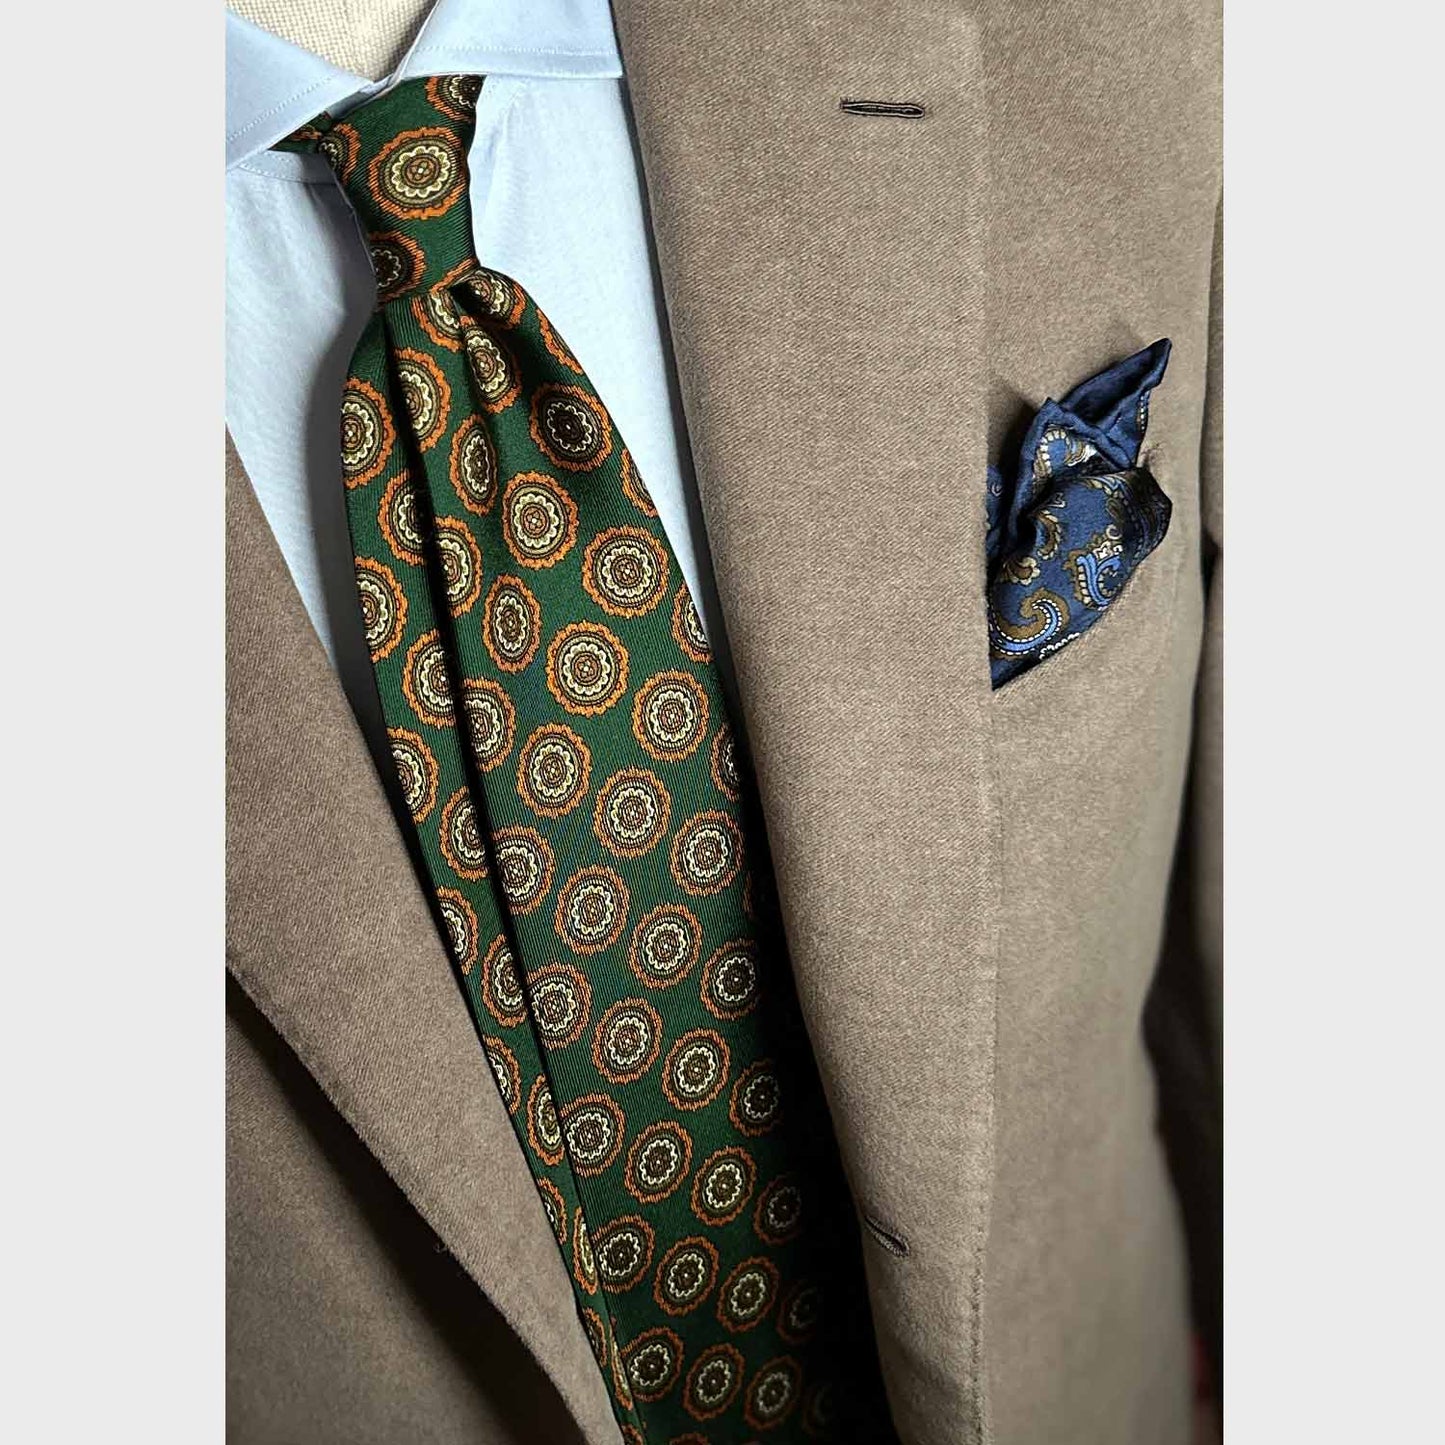 Men's green silk tie made with finest Italian silk soft to the touch, unlined tie 3 folds, refined medallions printed pattern olive green and orange, classic handmade tie F.Marino Napoli exclusive for Wools Boutique Uomo